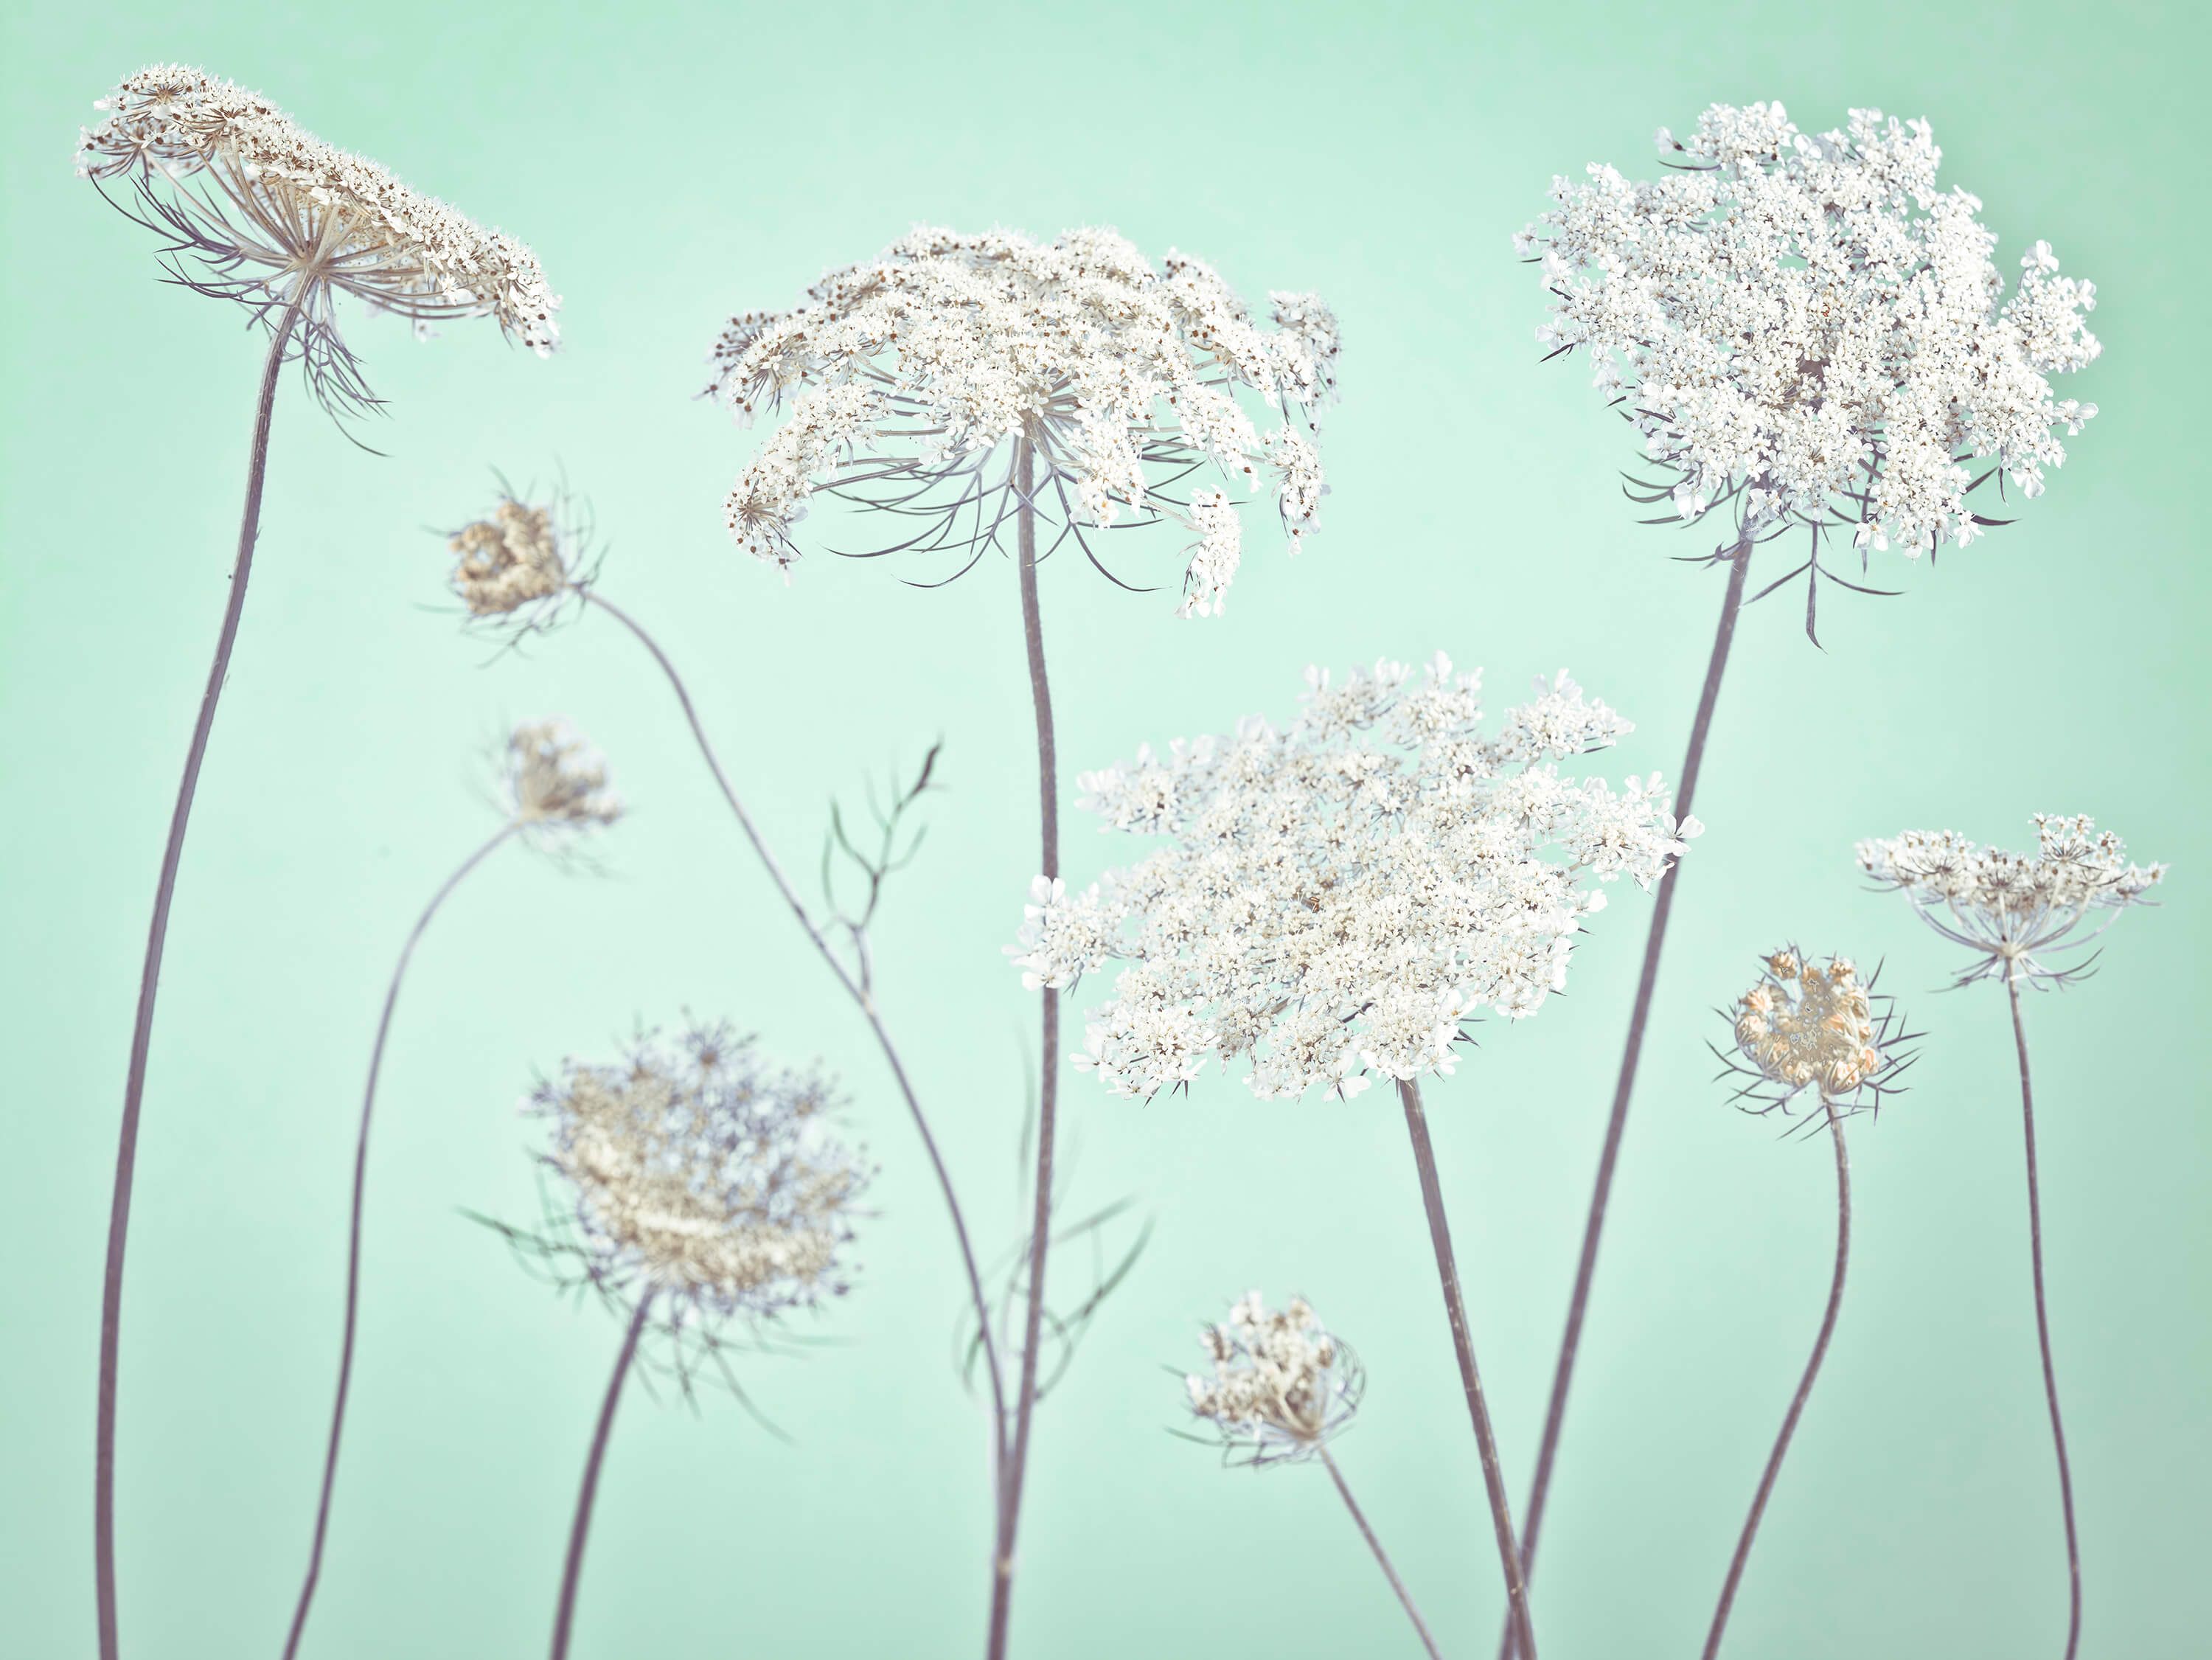  Cow parsley, green